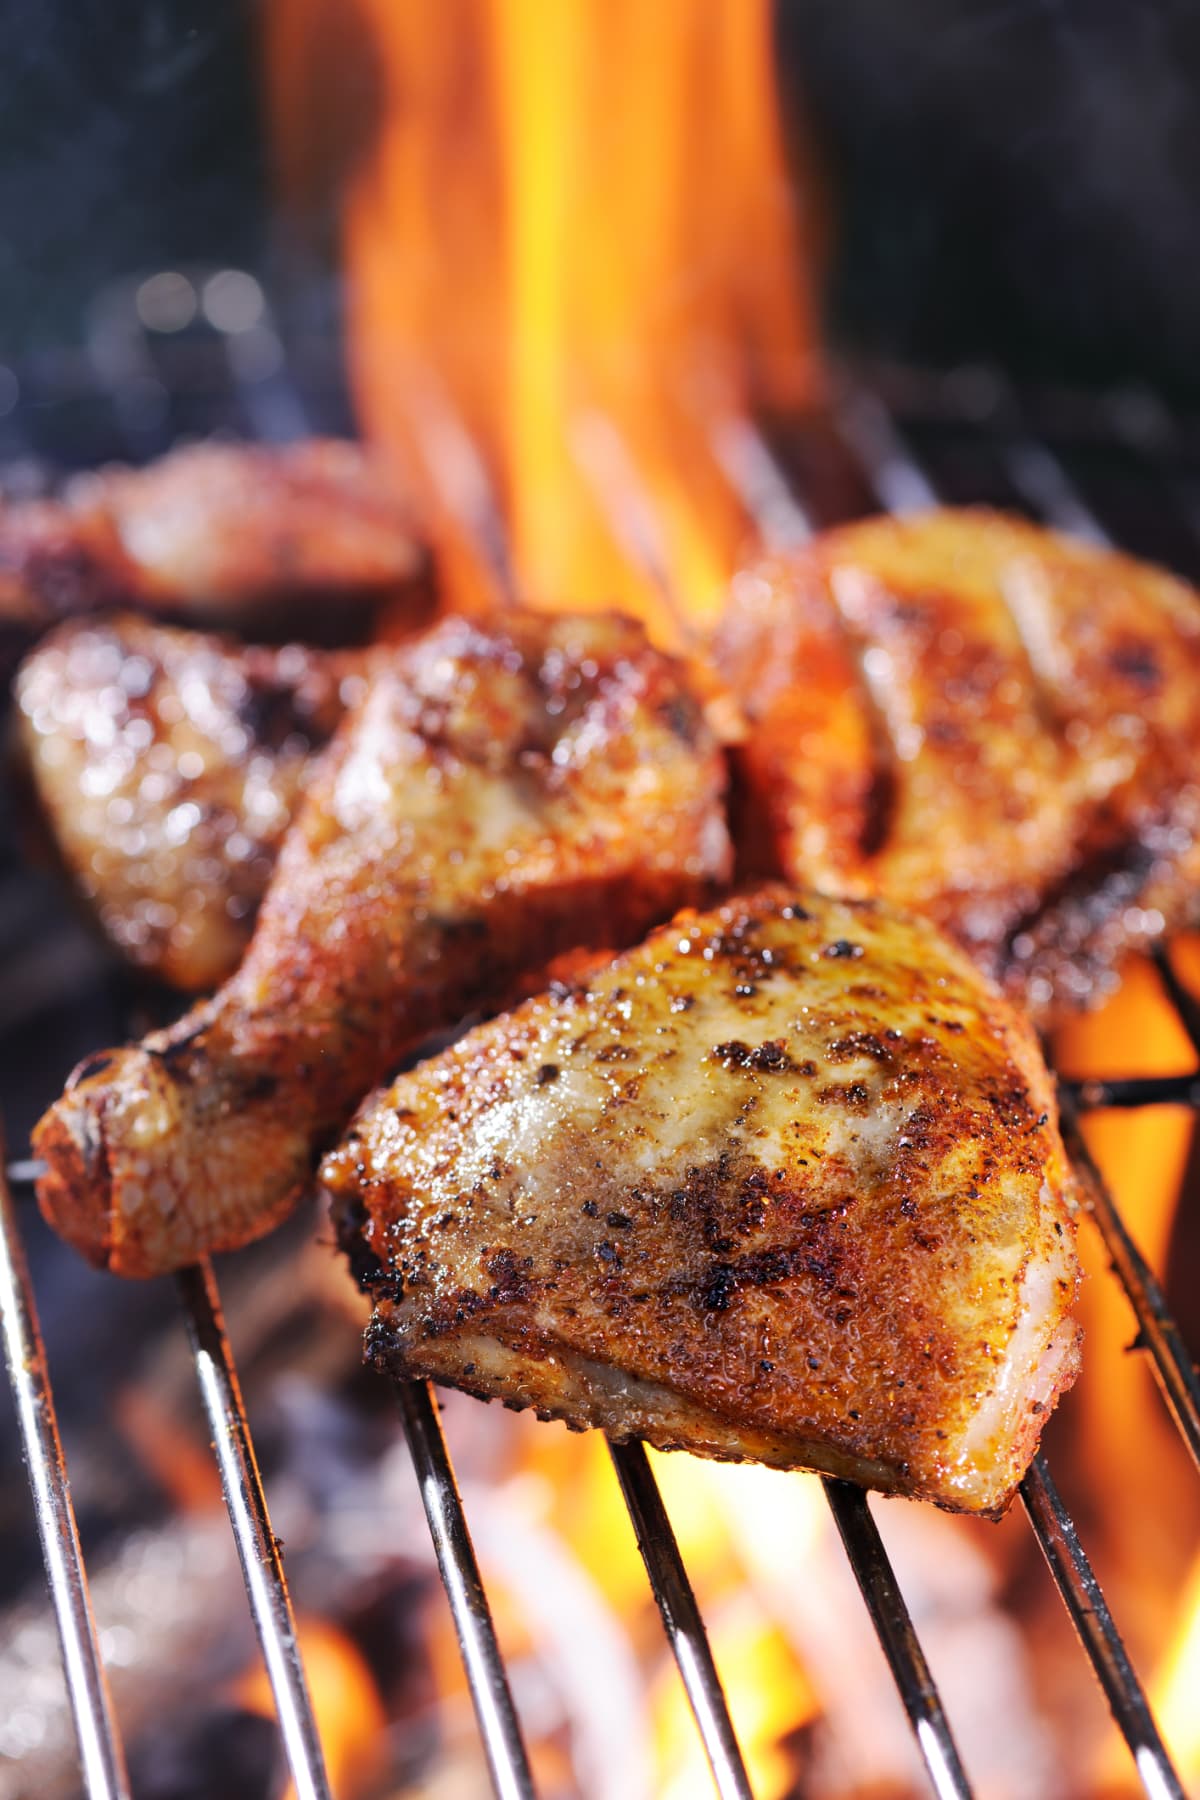 Chargrilled chicken on barbecue - shallow dof - XXXL Image